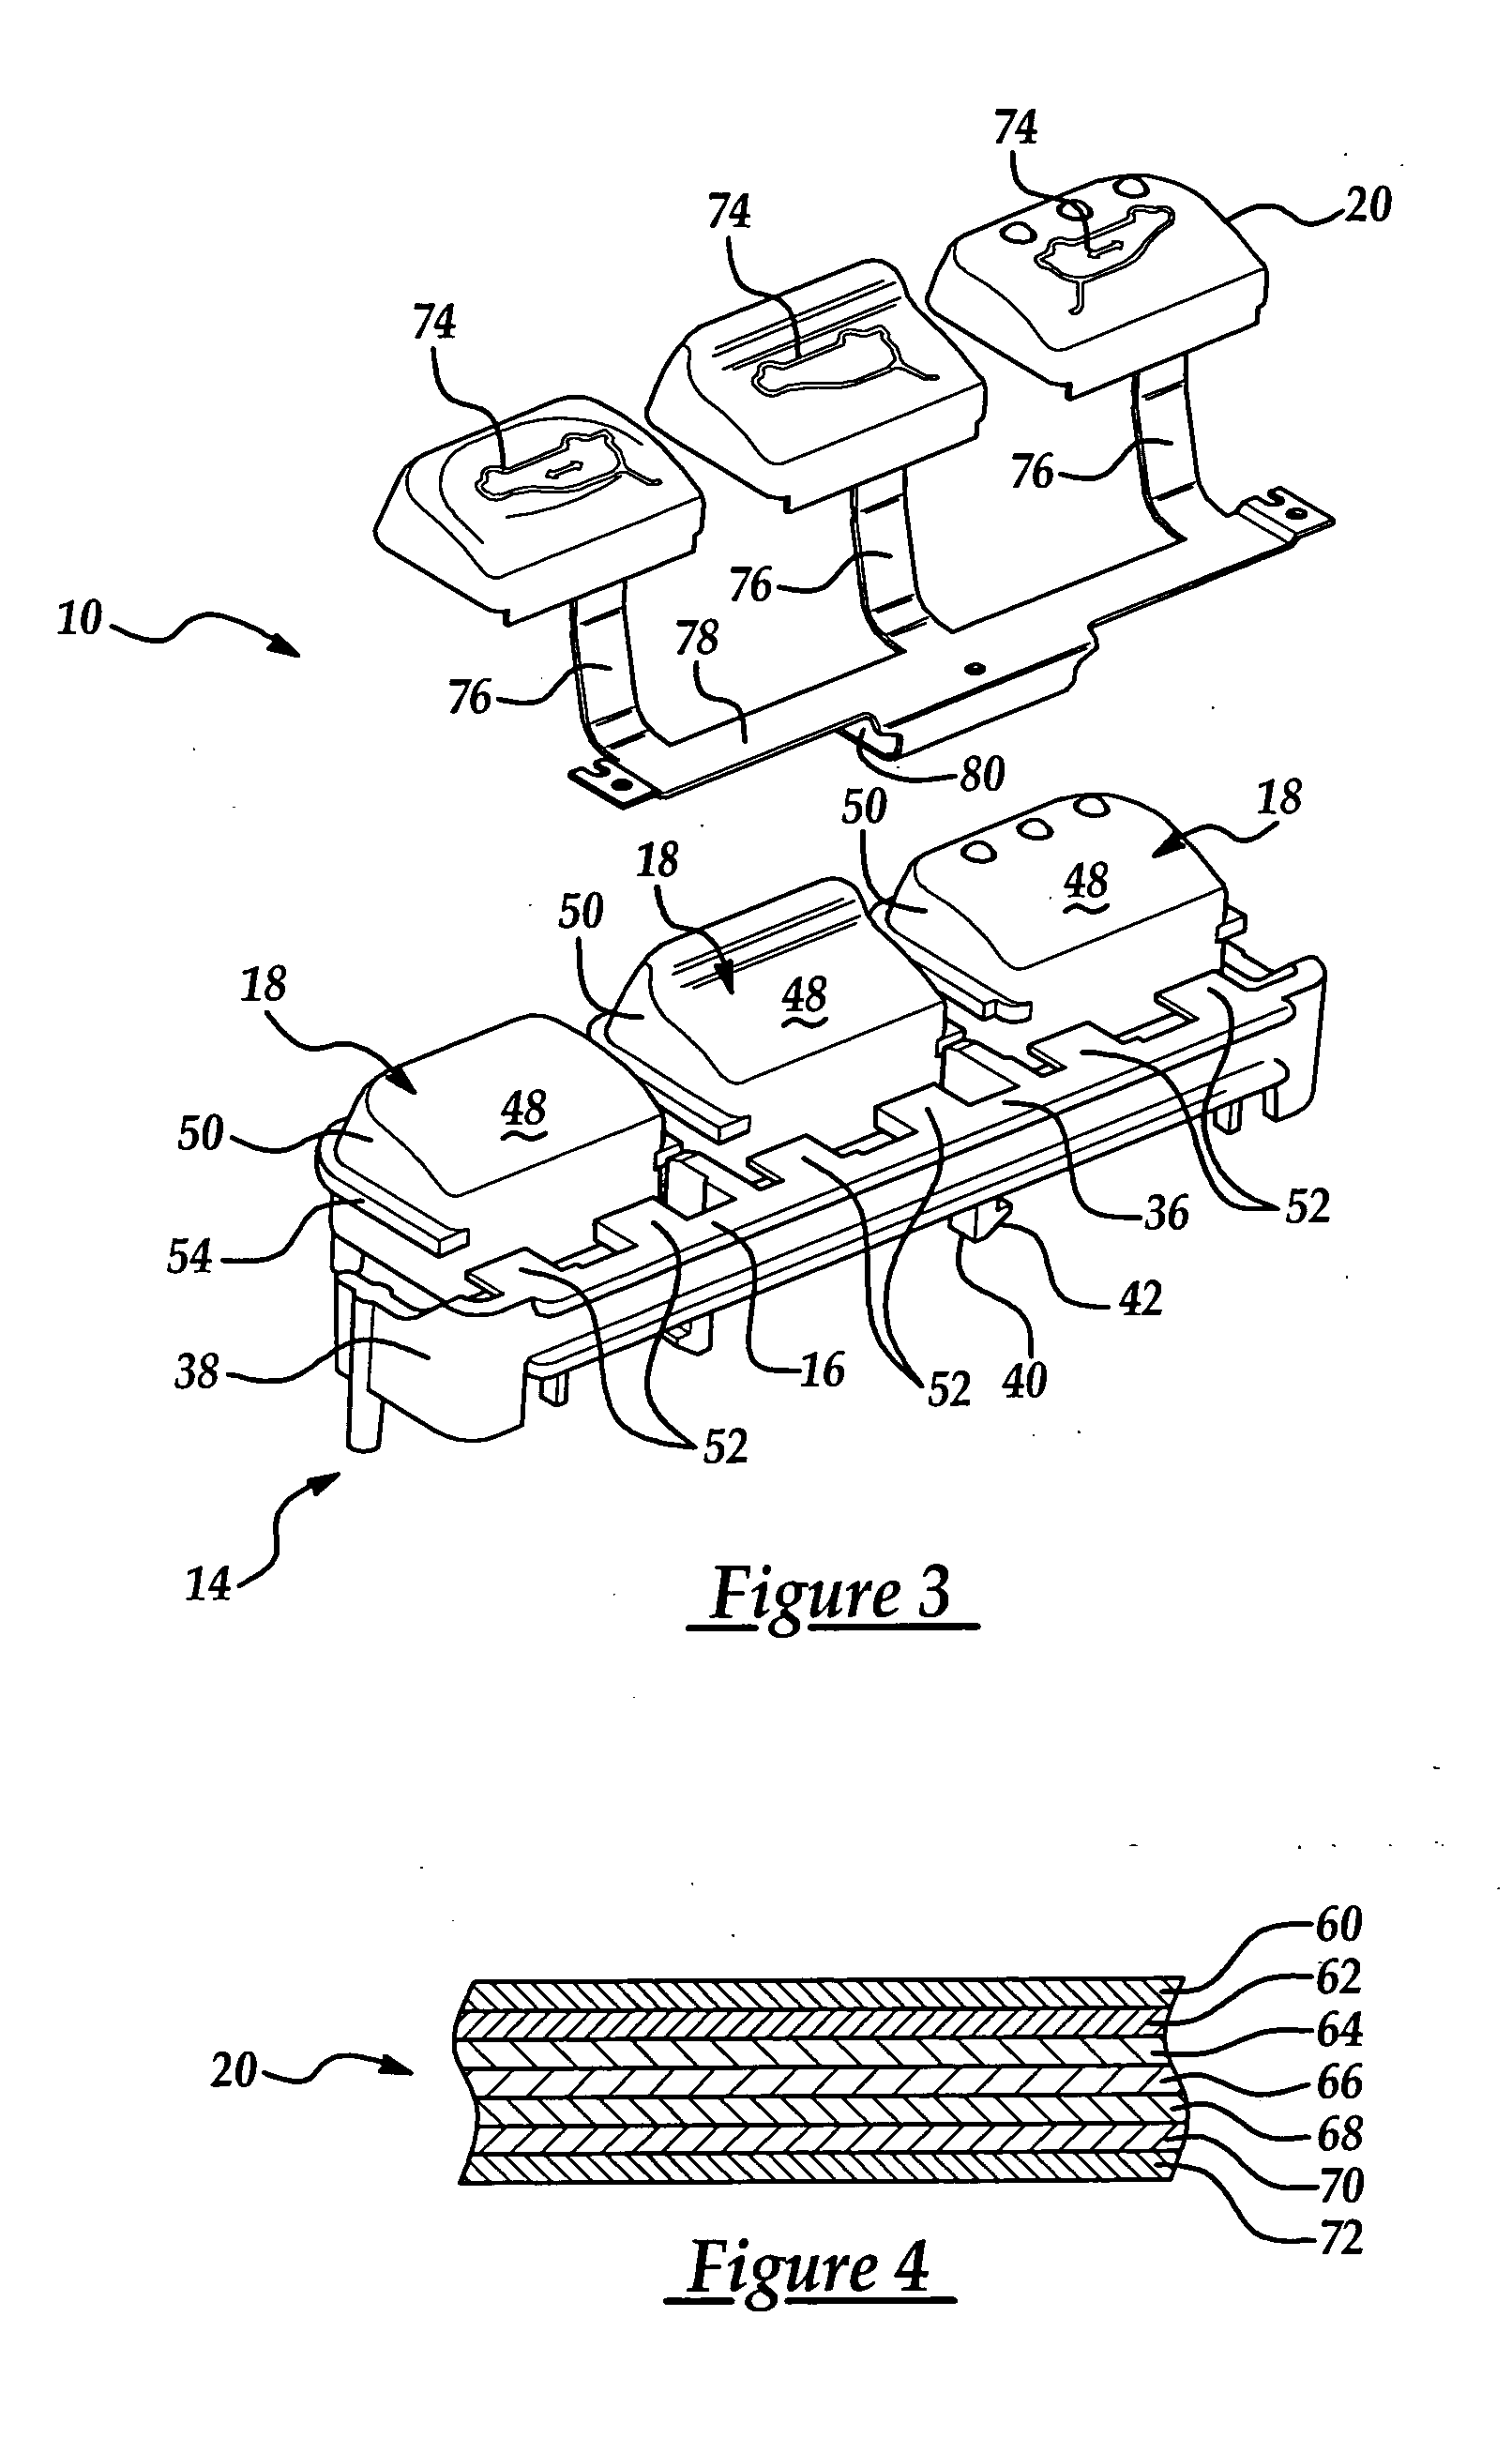 Control panel assembly with moveable illuminating button and method of making the same